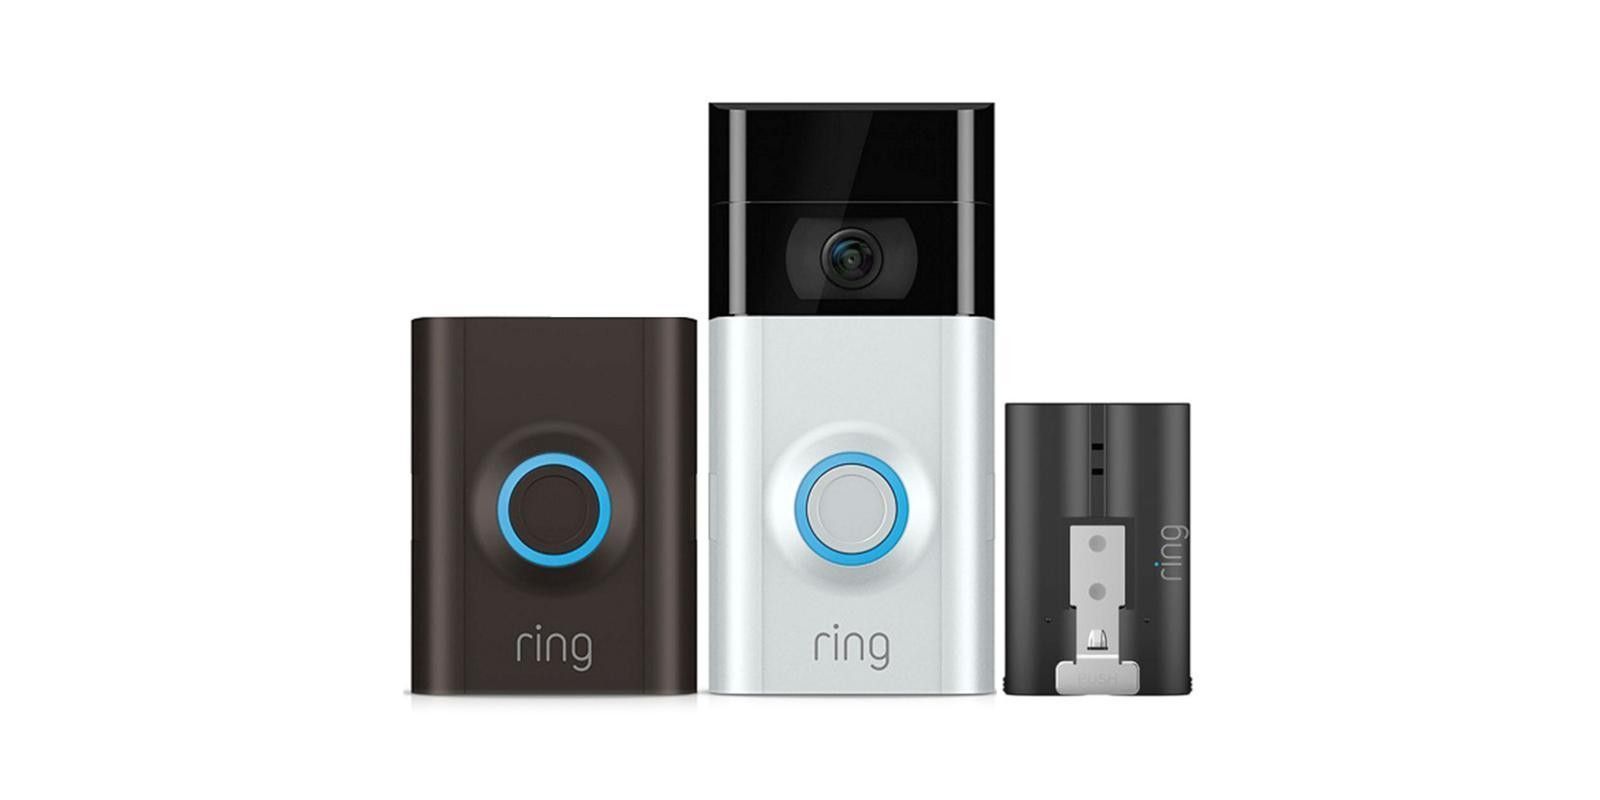 How to optimize your video doorbell and home security system